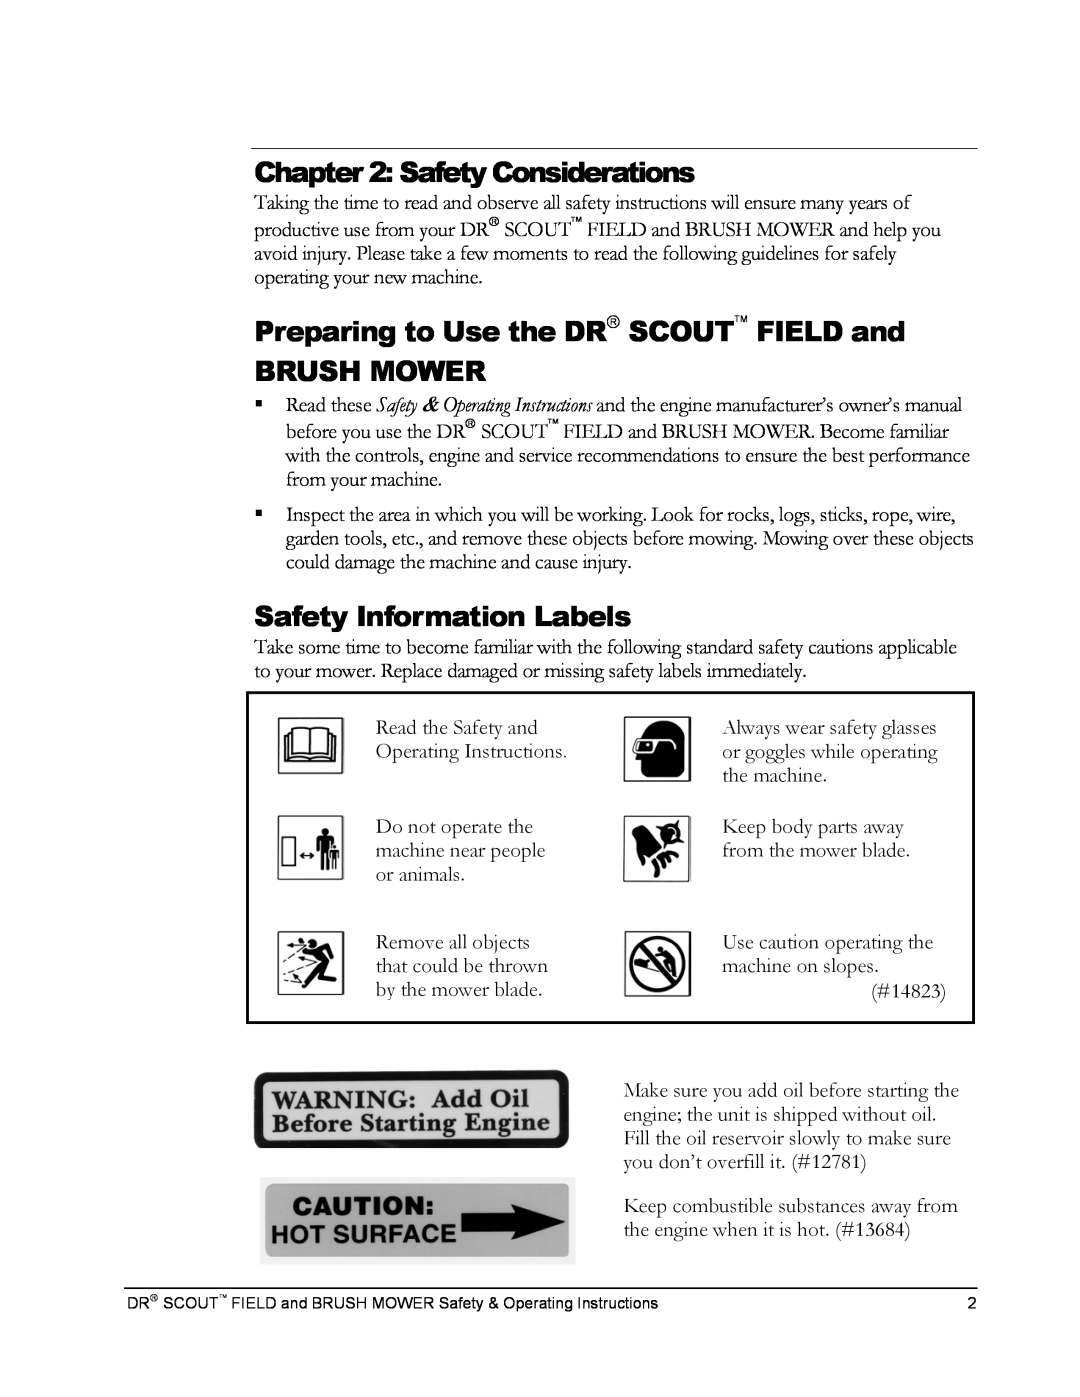 Country Home Products DR SCOUT FIELD and BRUSH MOWER manual Safety Considerations, Safety Information Labels 